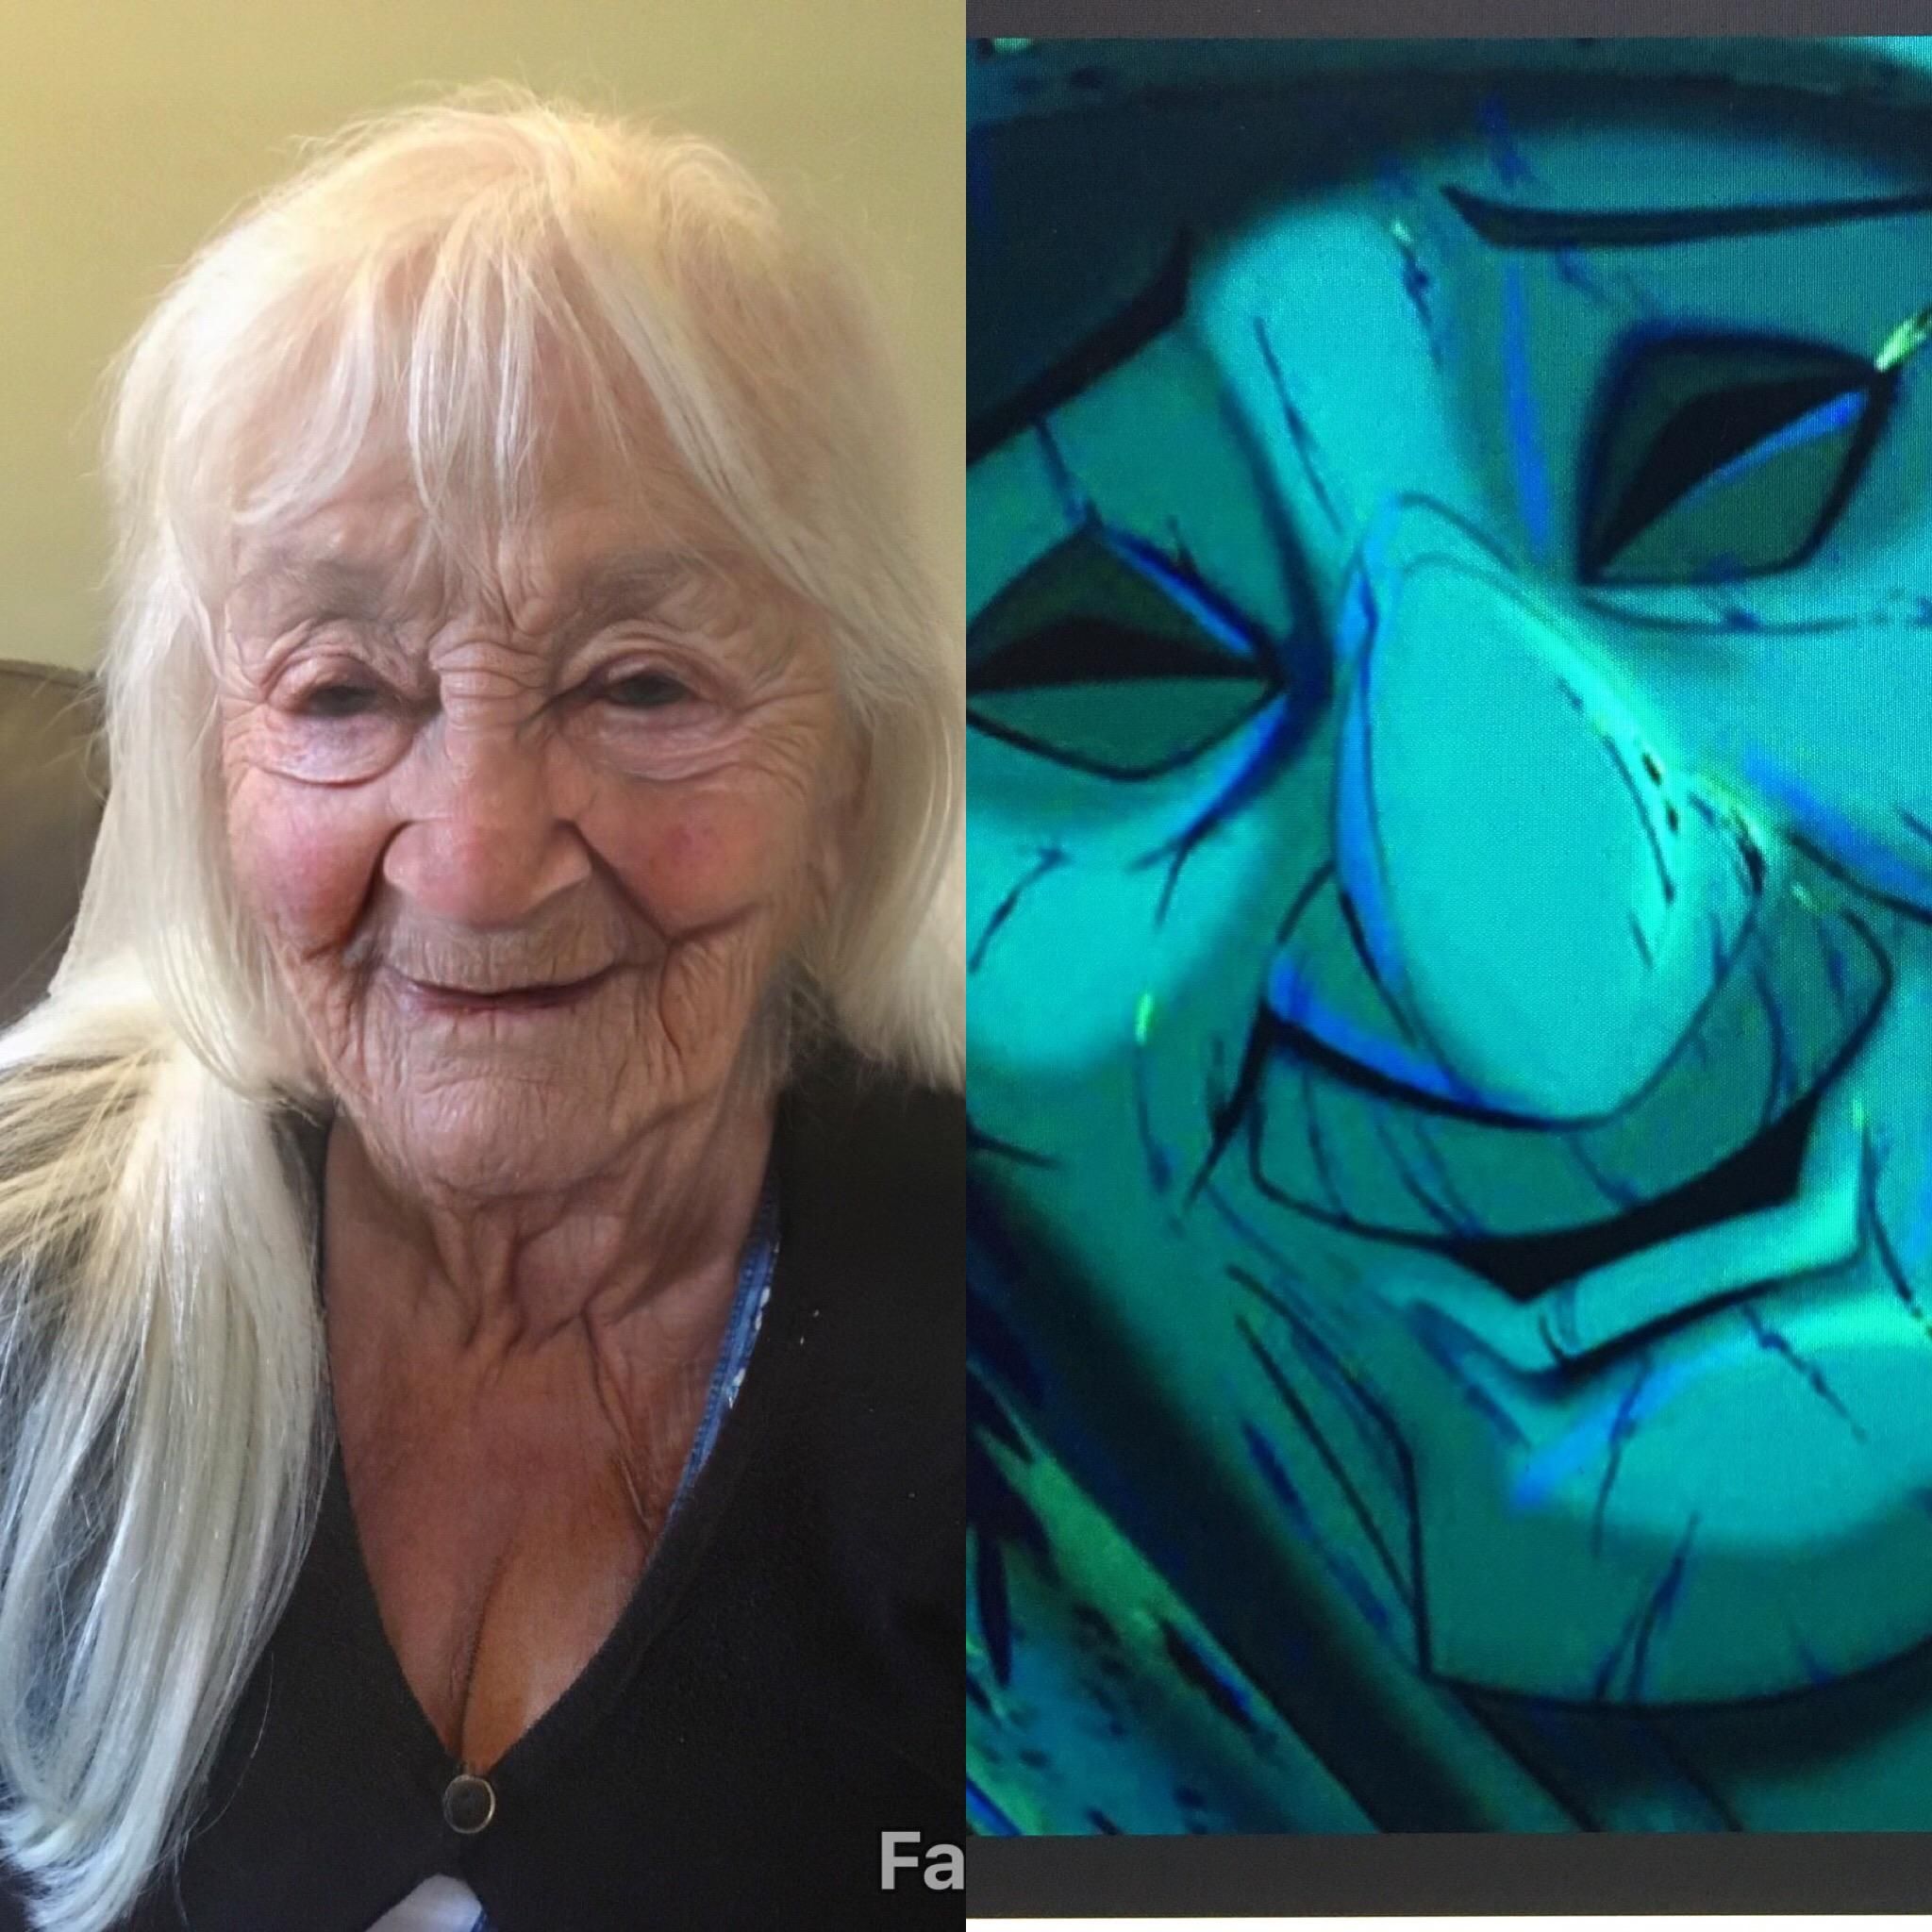 I did the aging app on my mum, and she turned into Grandmother Willow from Pocahontas